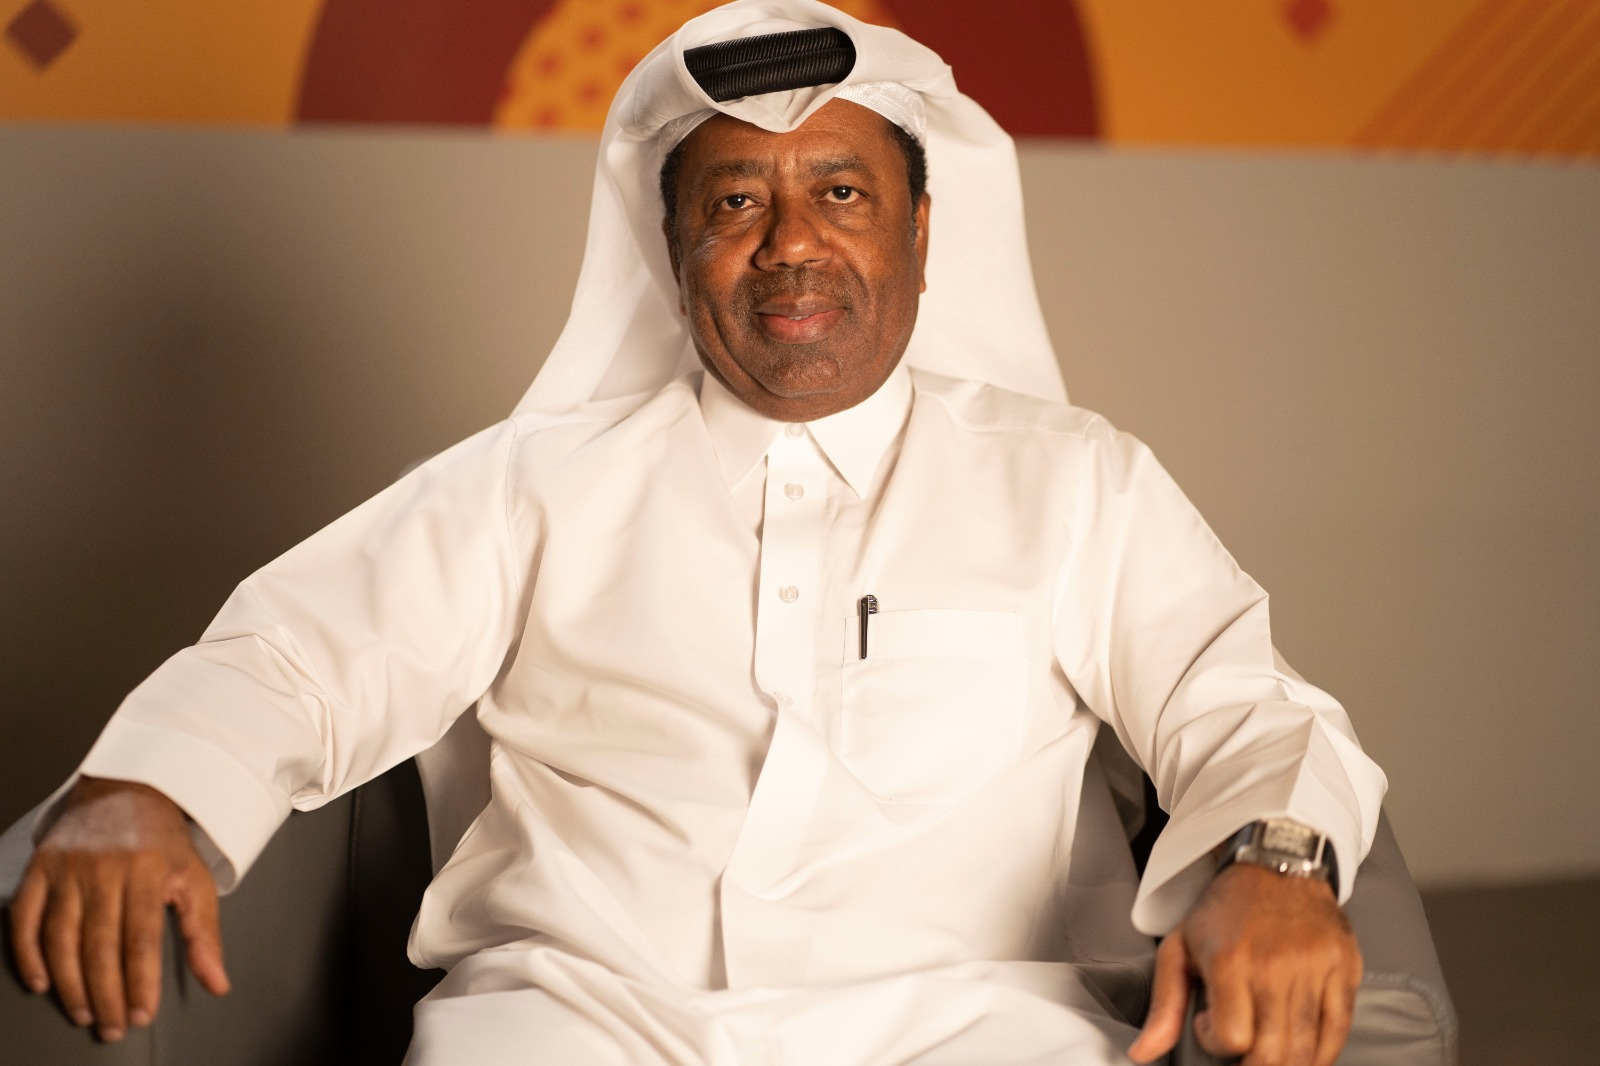 'FIFA World Cup in Qatar is an Achievement for the Entire Arab World'